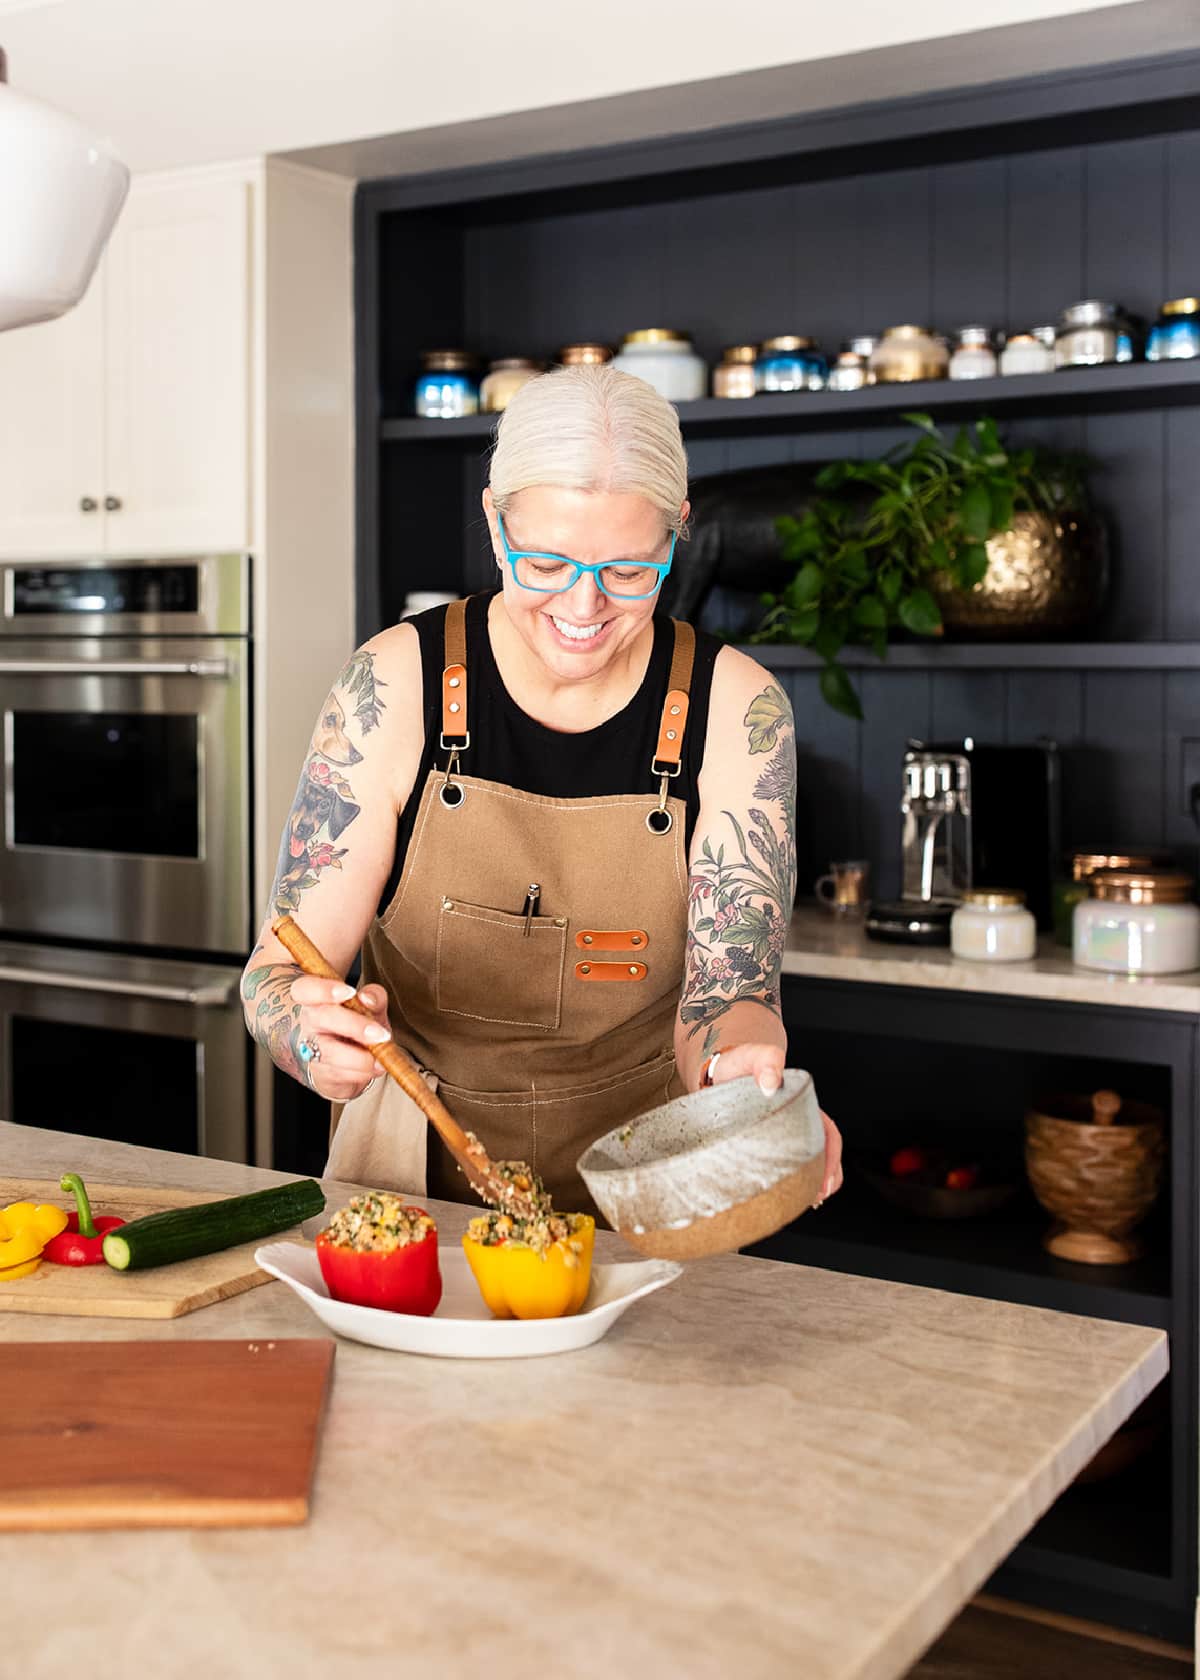 Kristina standing at a counter in a sleeveless black top and a tan chefs apron, holding a bowl of quinoa salad as she spoons the salad into a hollowed out bell pepper.